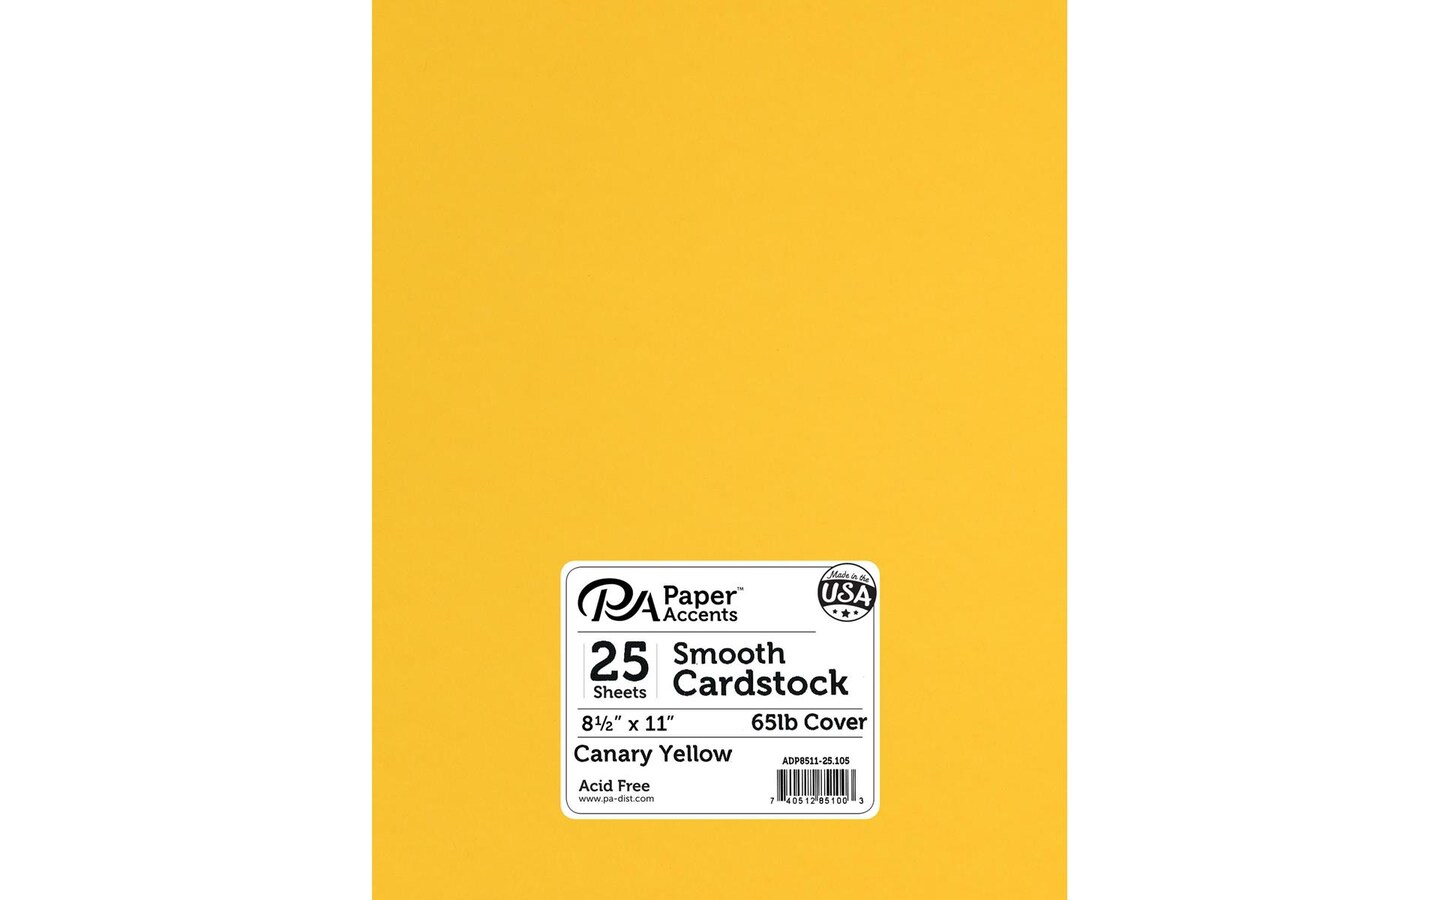 PA Paper Accents Smooth Cardstock 8.5 x 11 Canary Yellow, 65lb